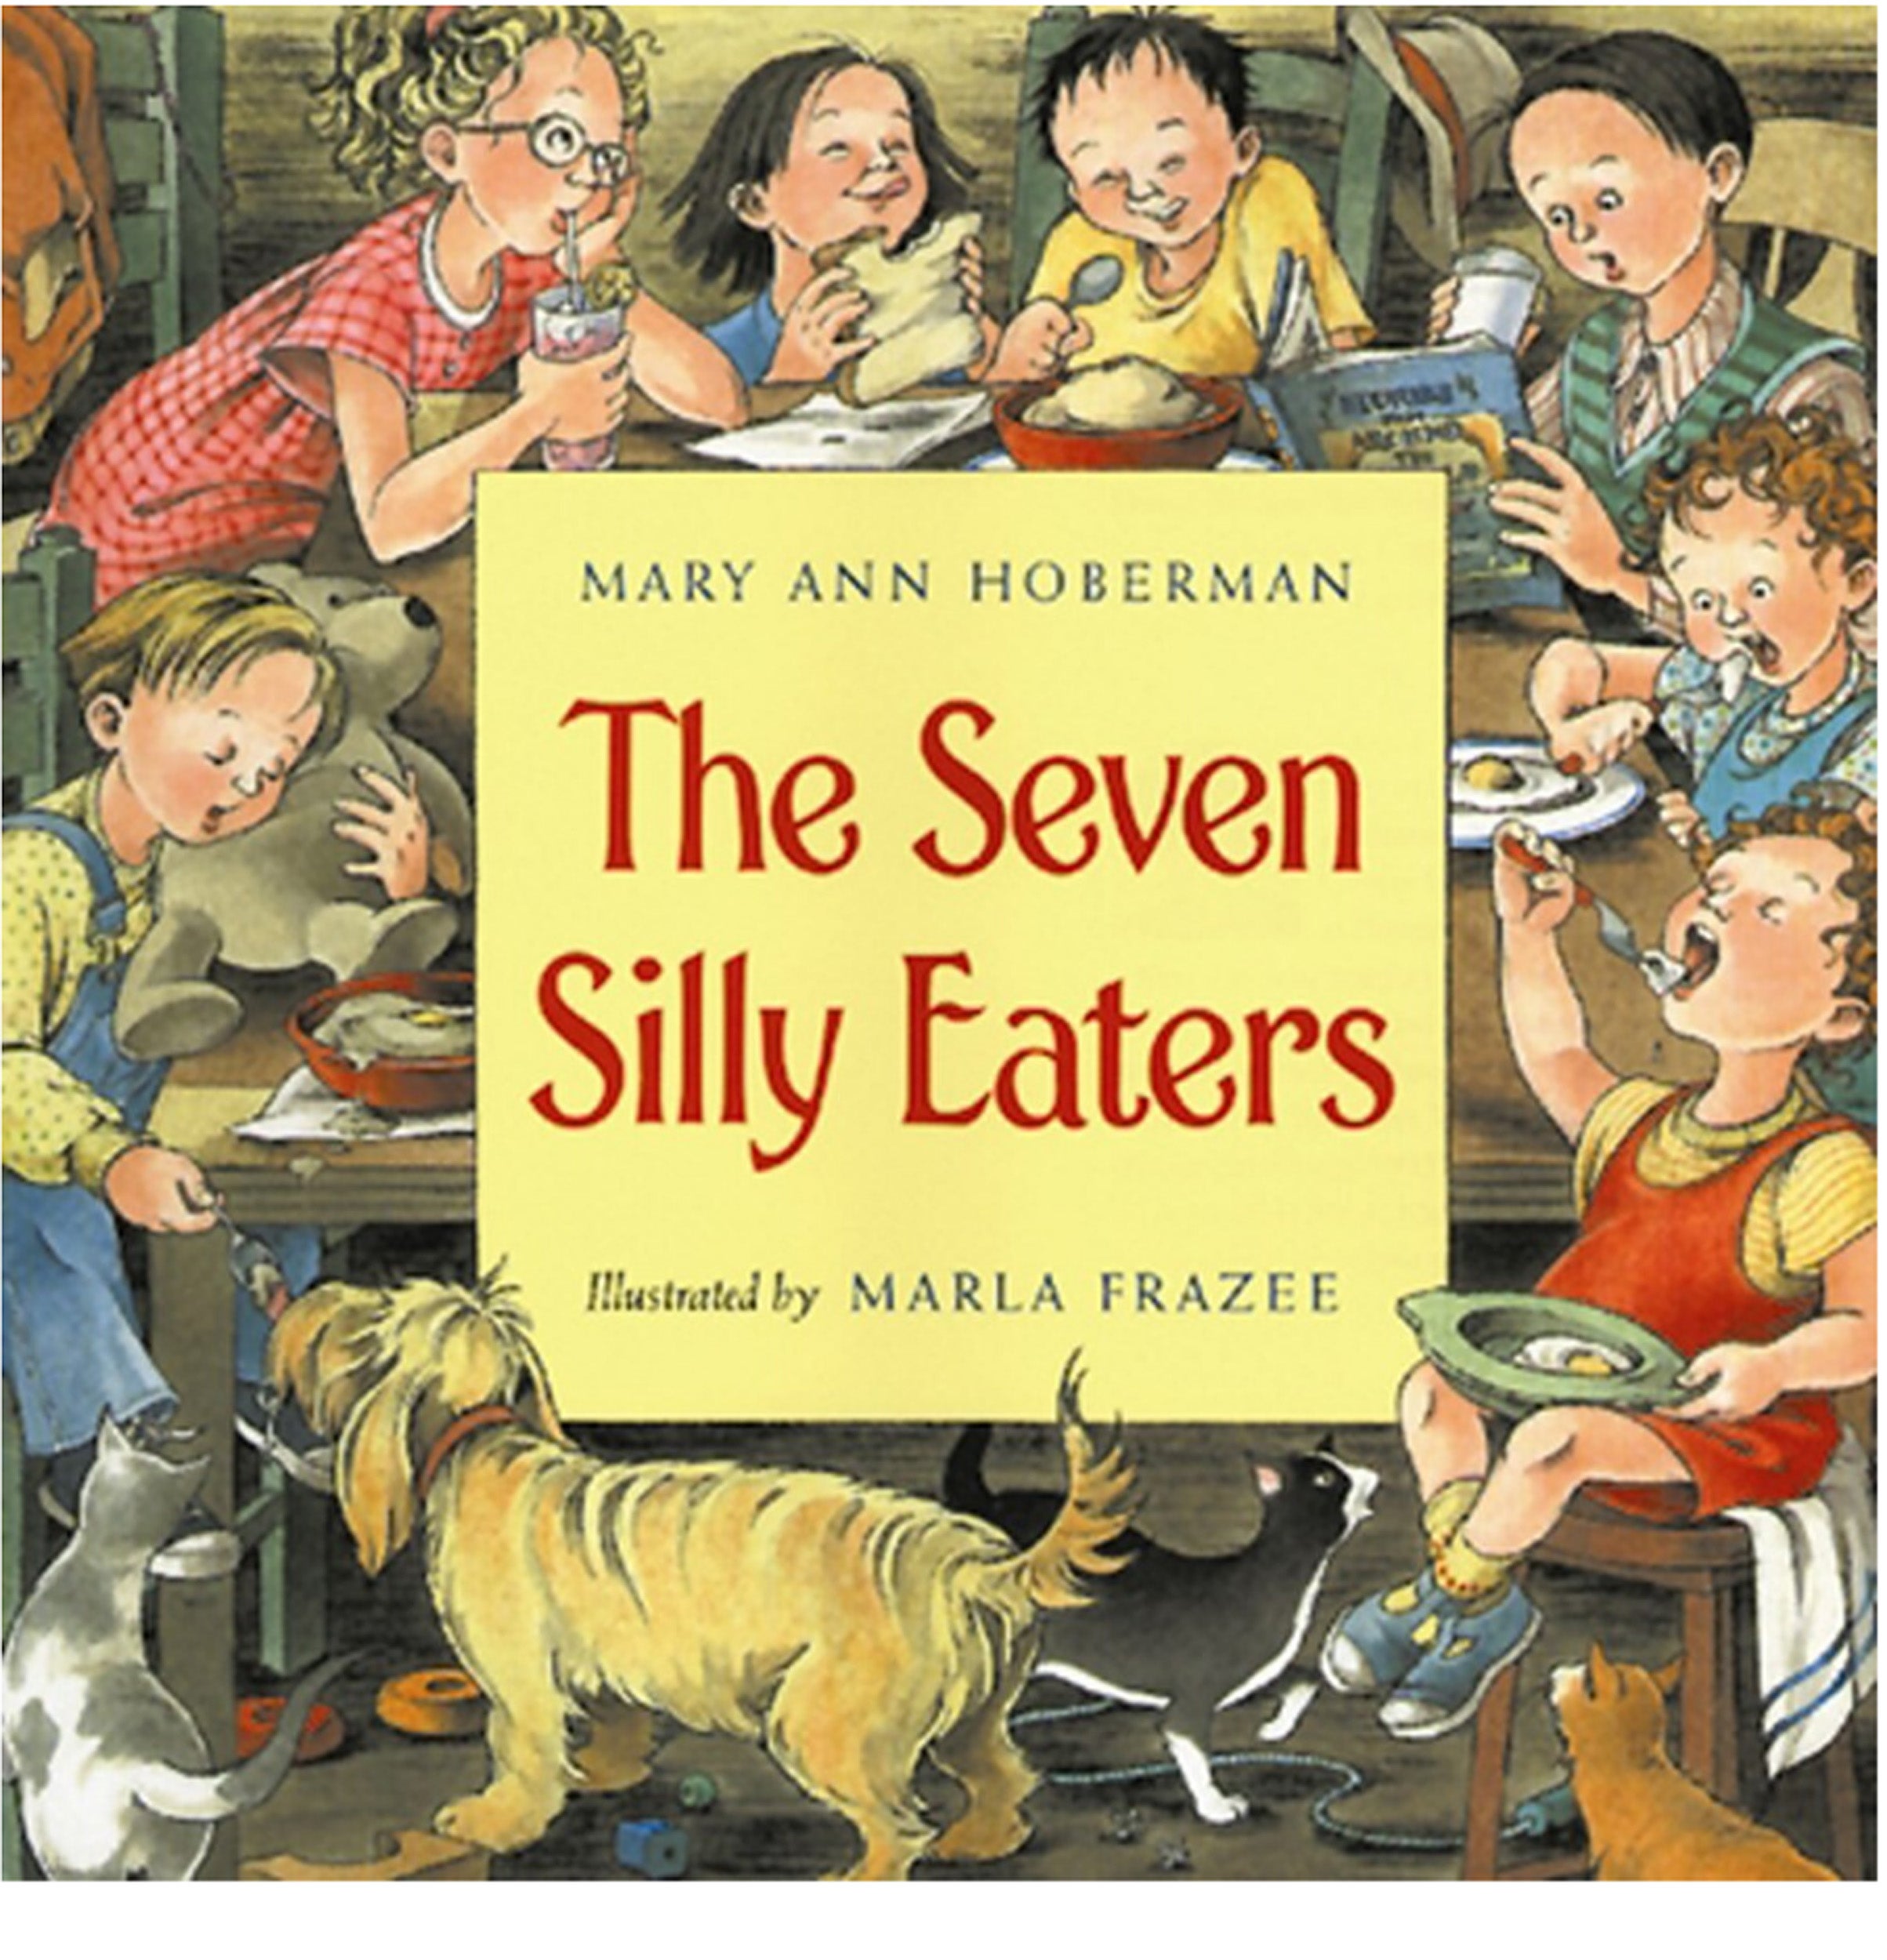 Cover of “The Seven Silly Eaters” by Mary Ann Hoberman.